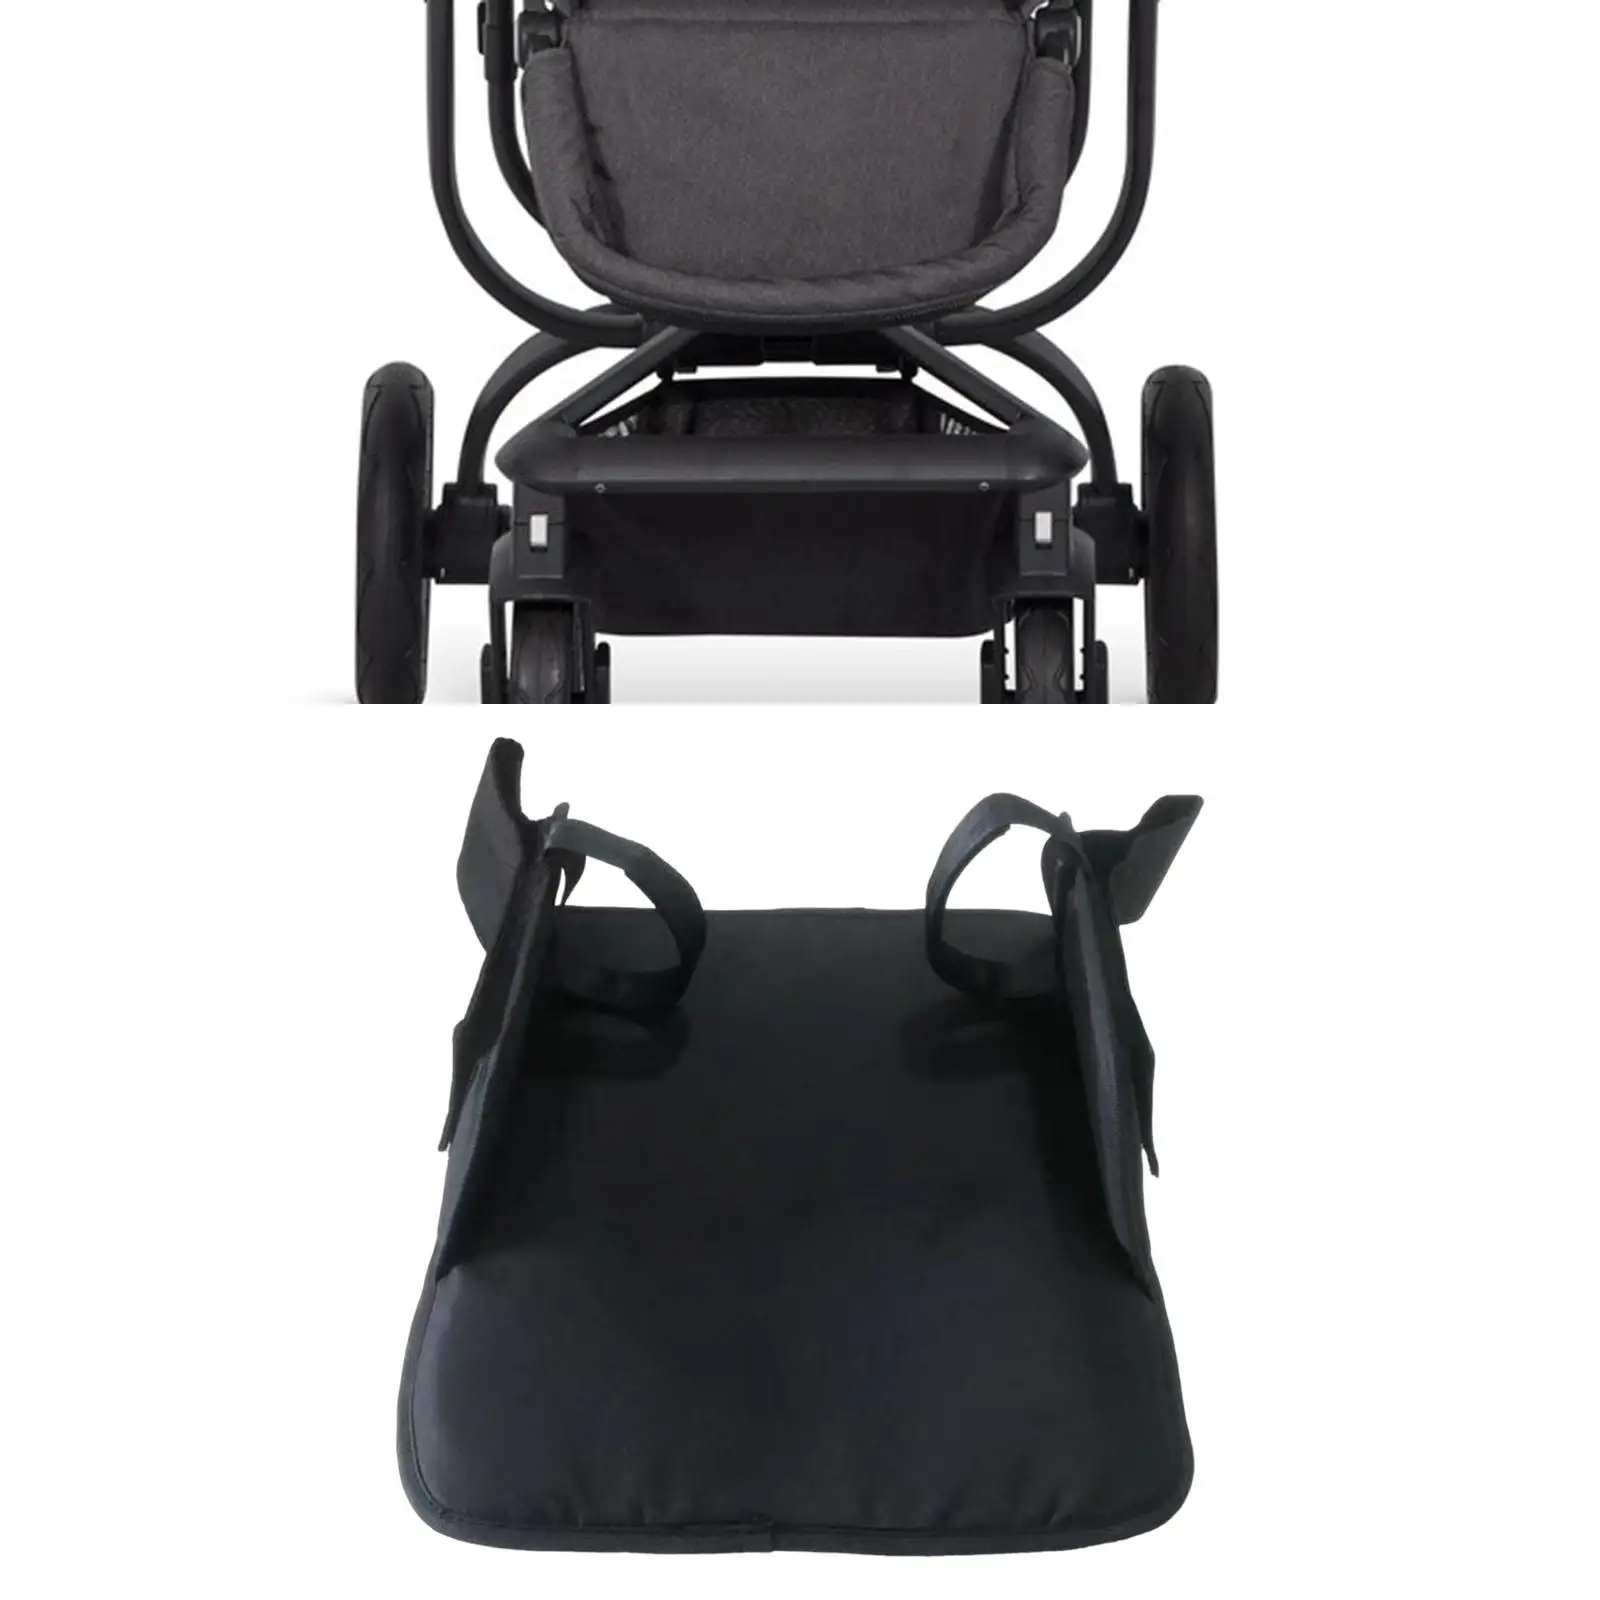 Feet Extension Pram Footboard Fitting Extended Foot Rest for Infants Babies